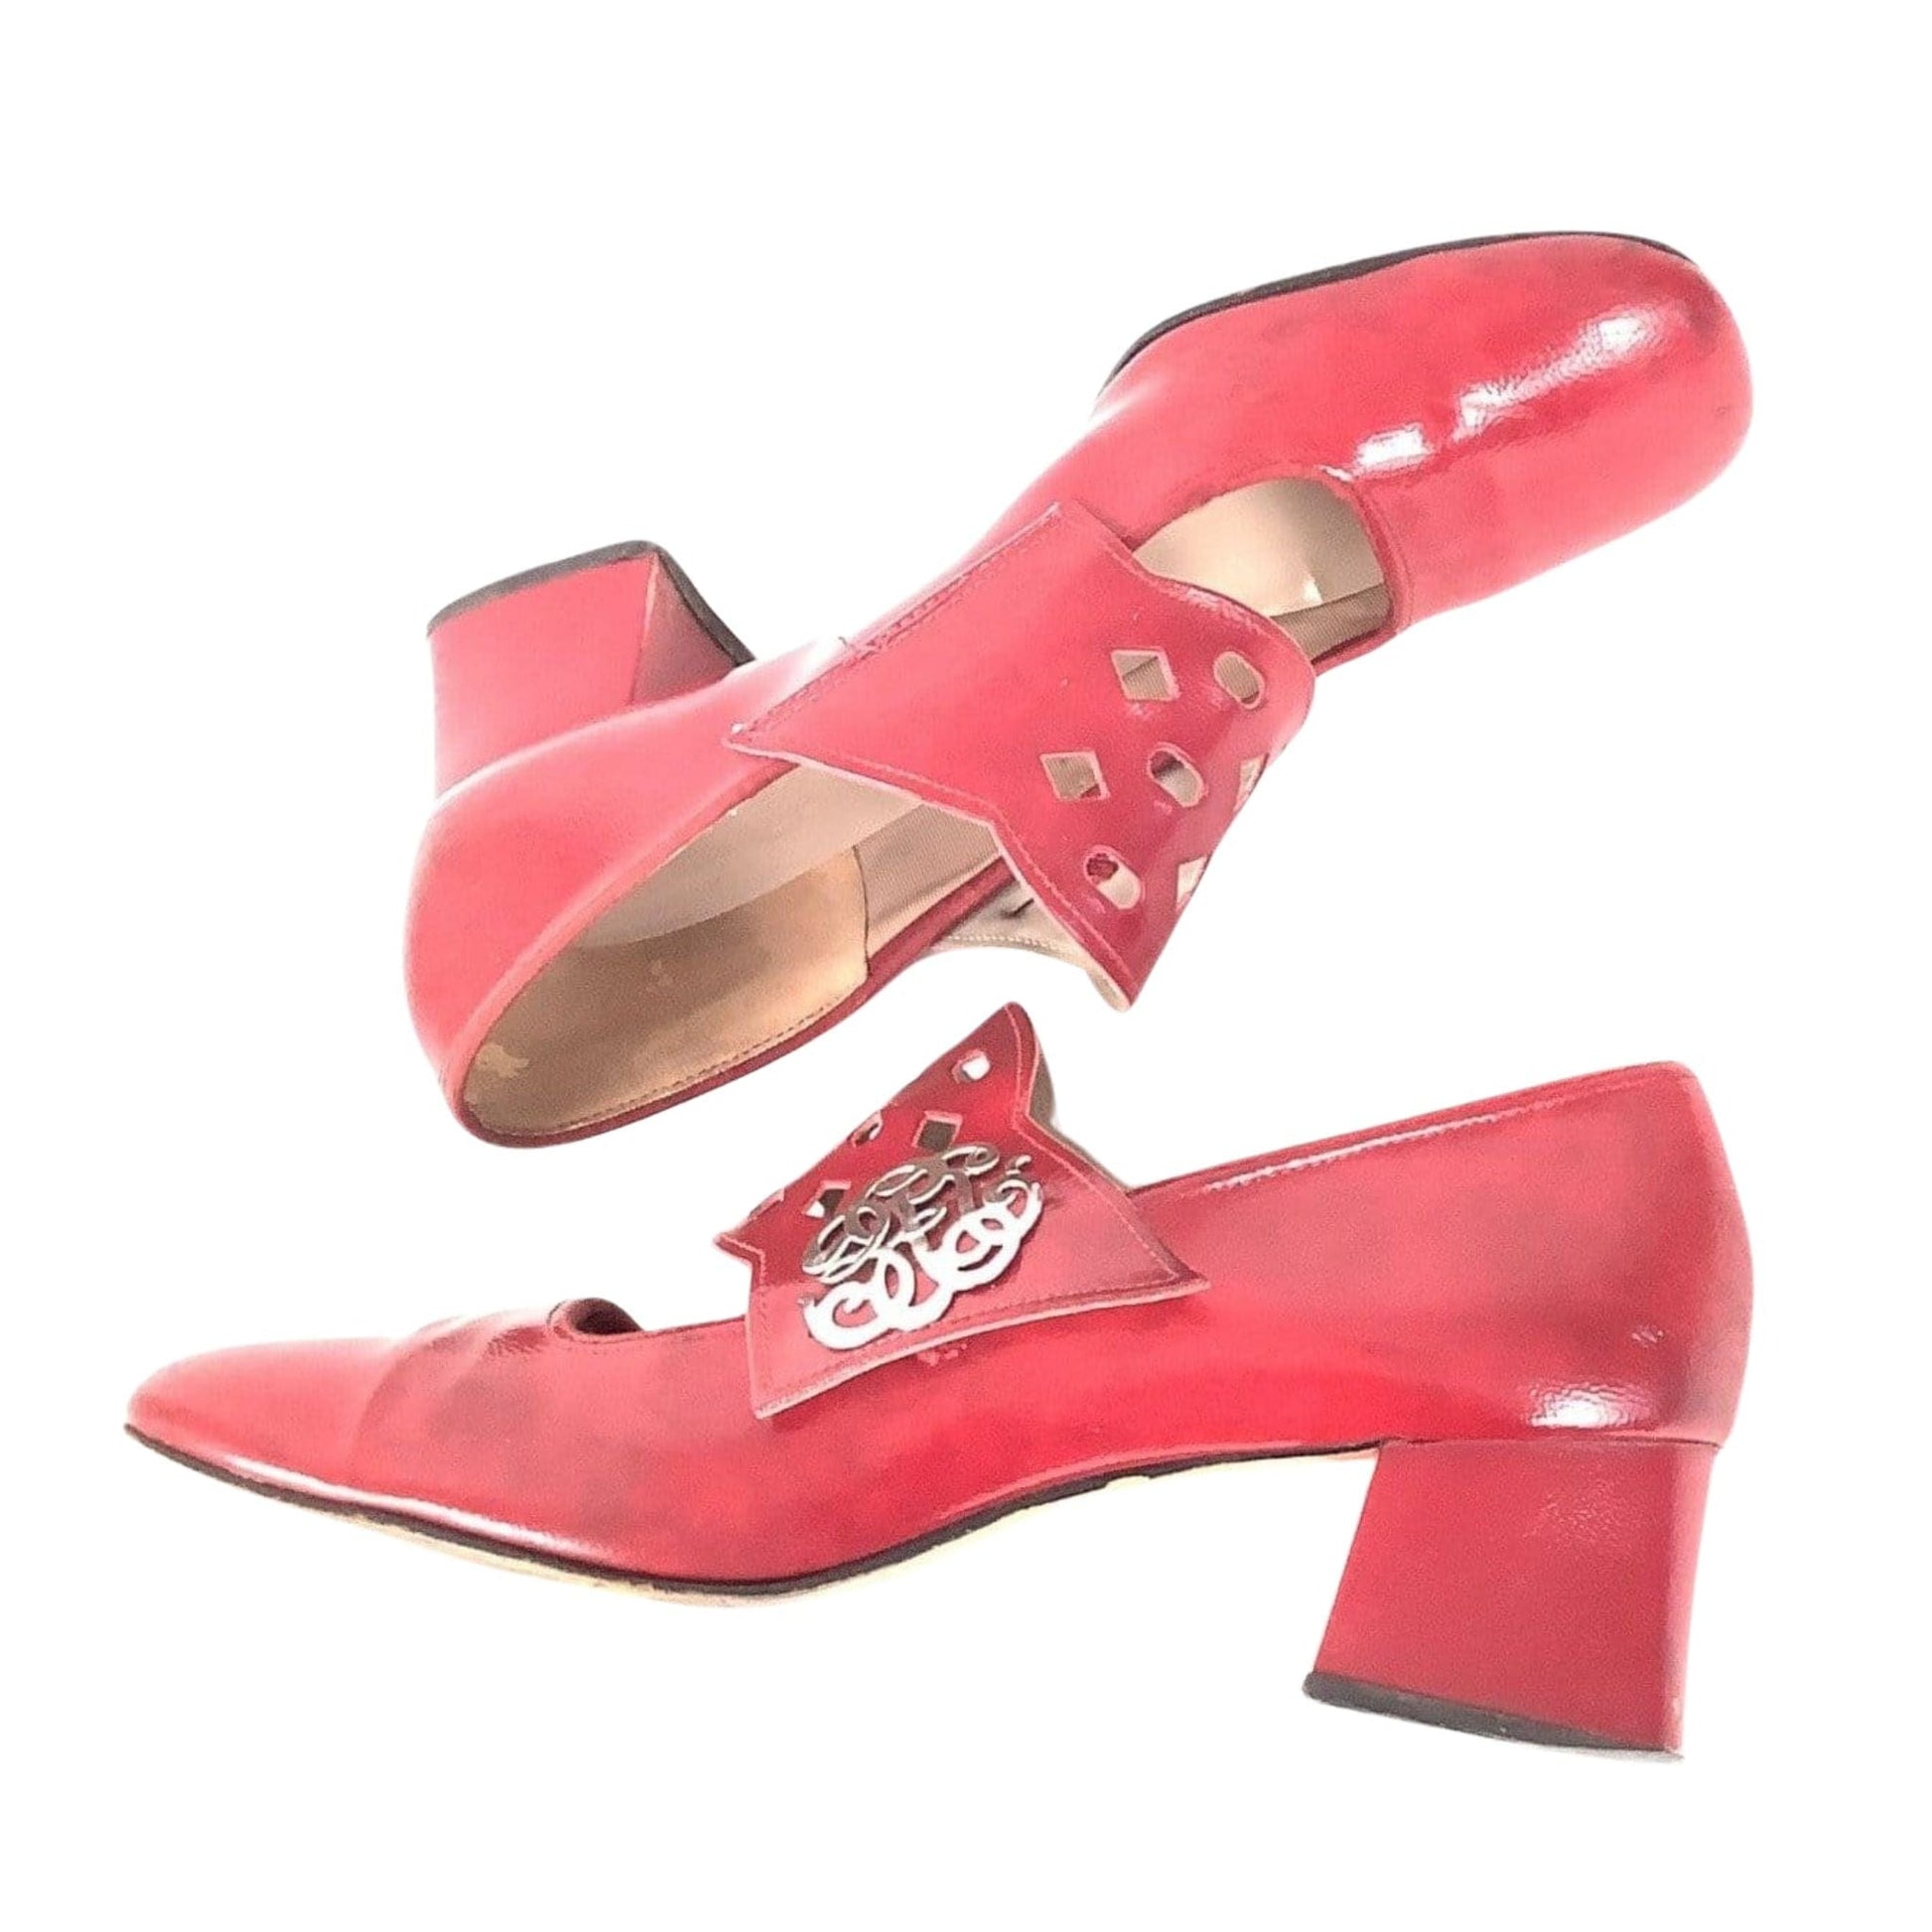 Sears Red Mary Janes 7.5 / Red / Mod